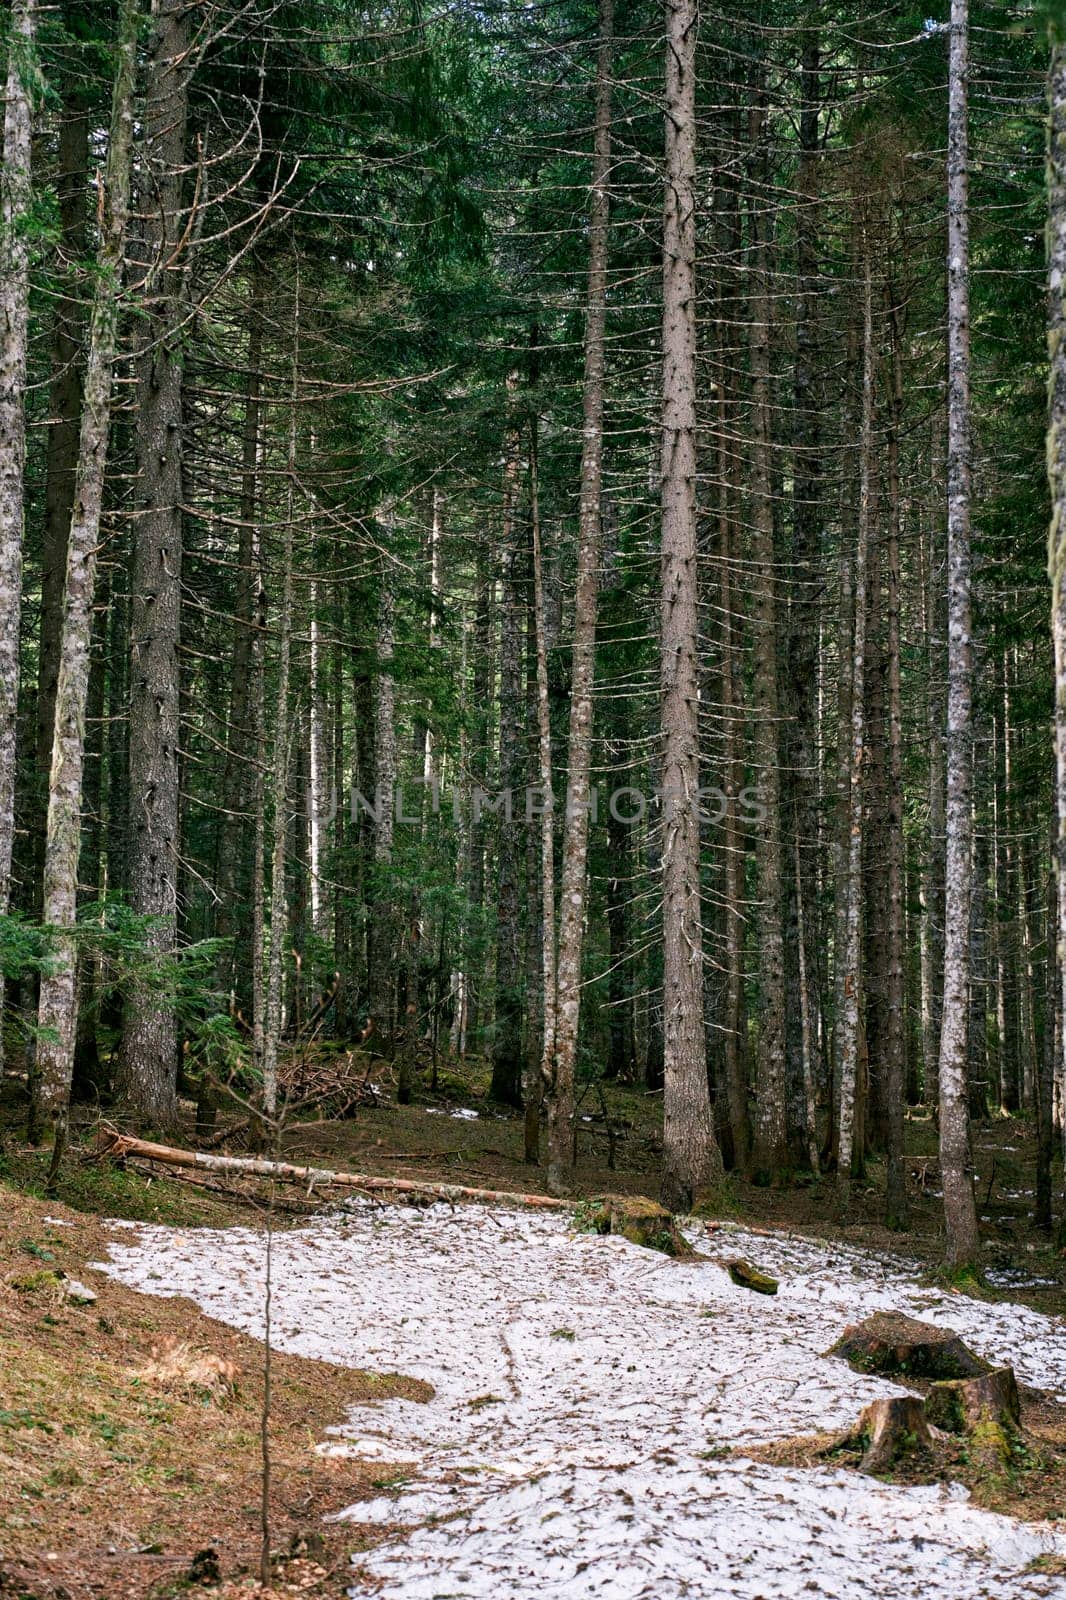 Snowy clearing in a dense spruce forest. High quality photo